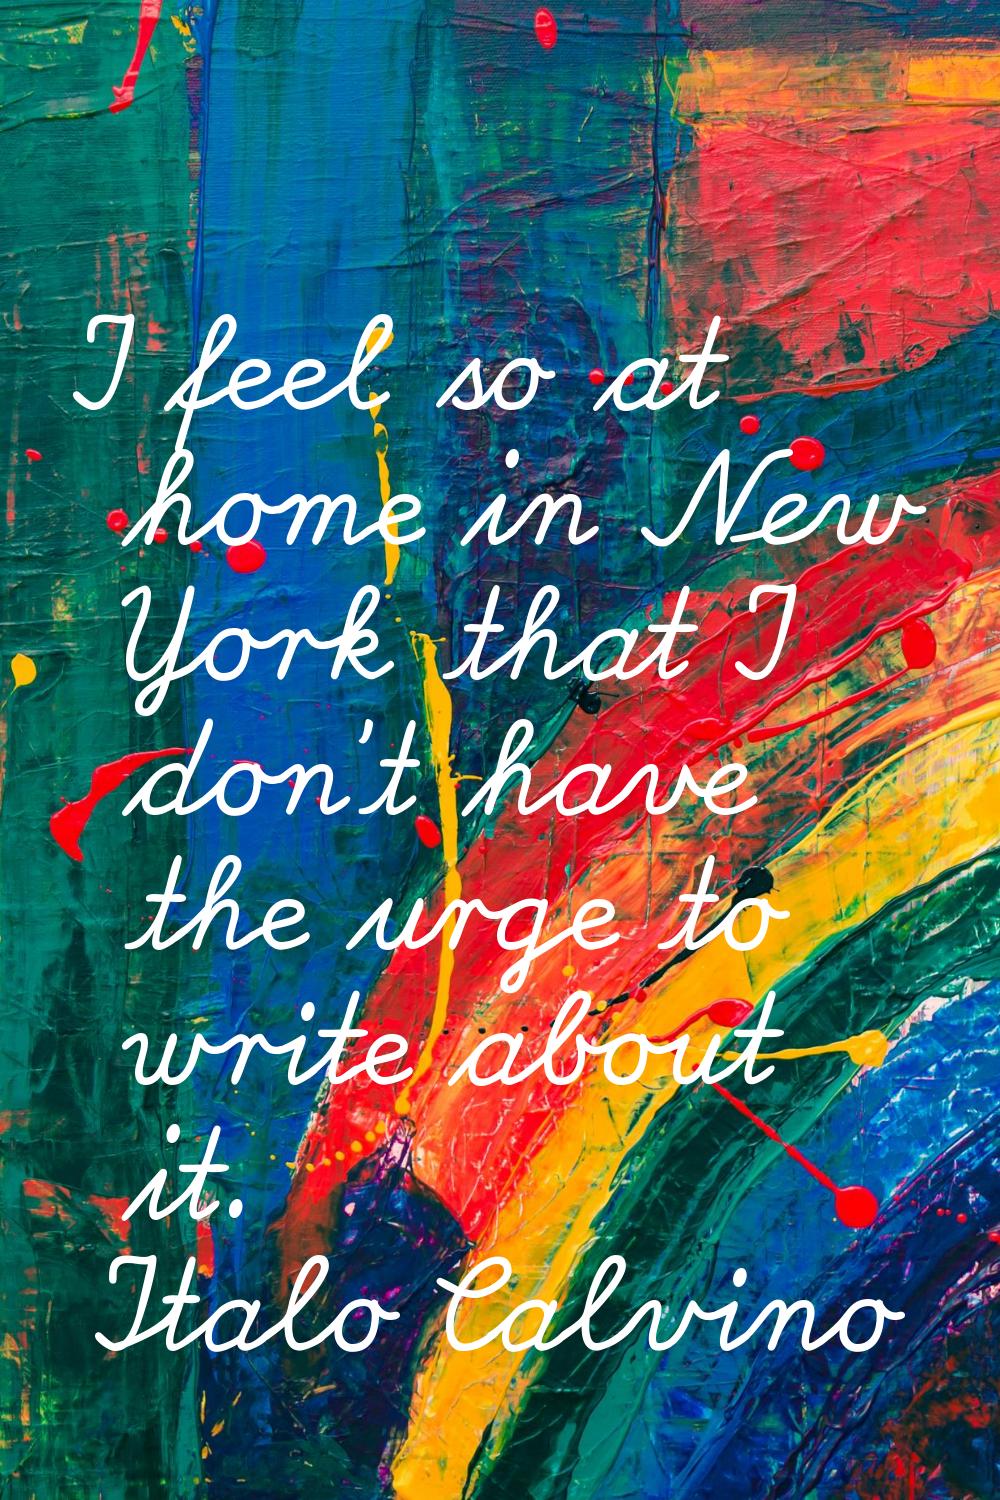 I feel so at home in New York that I don't have the urge to write about it.